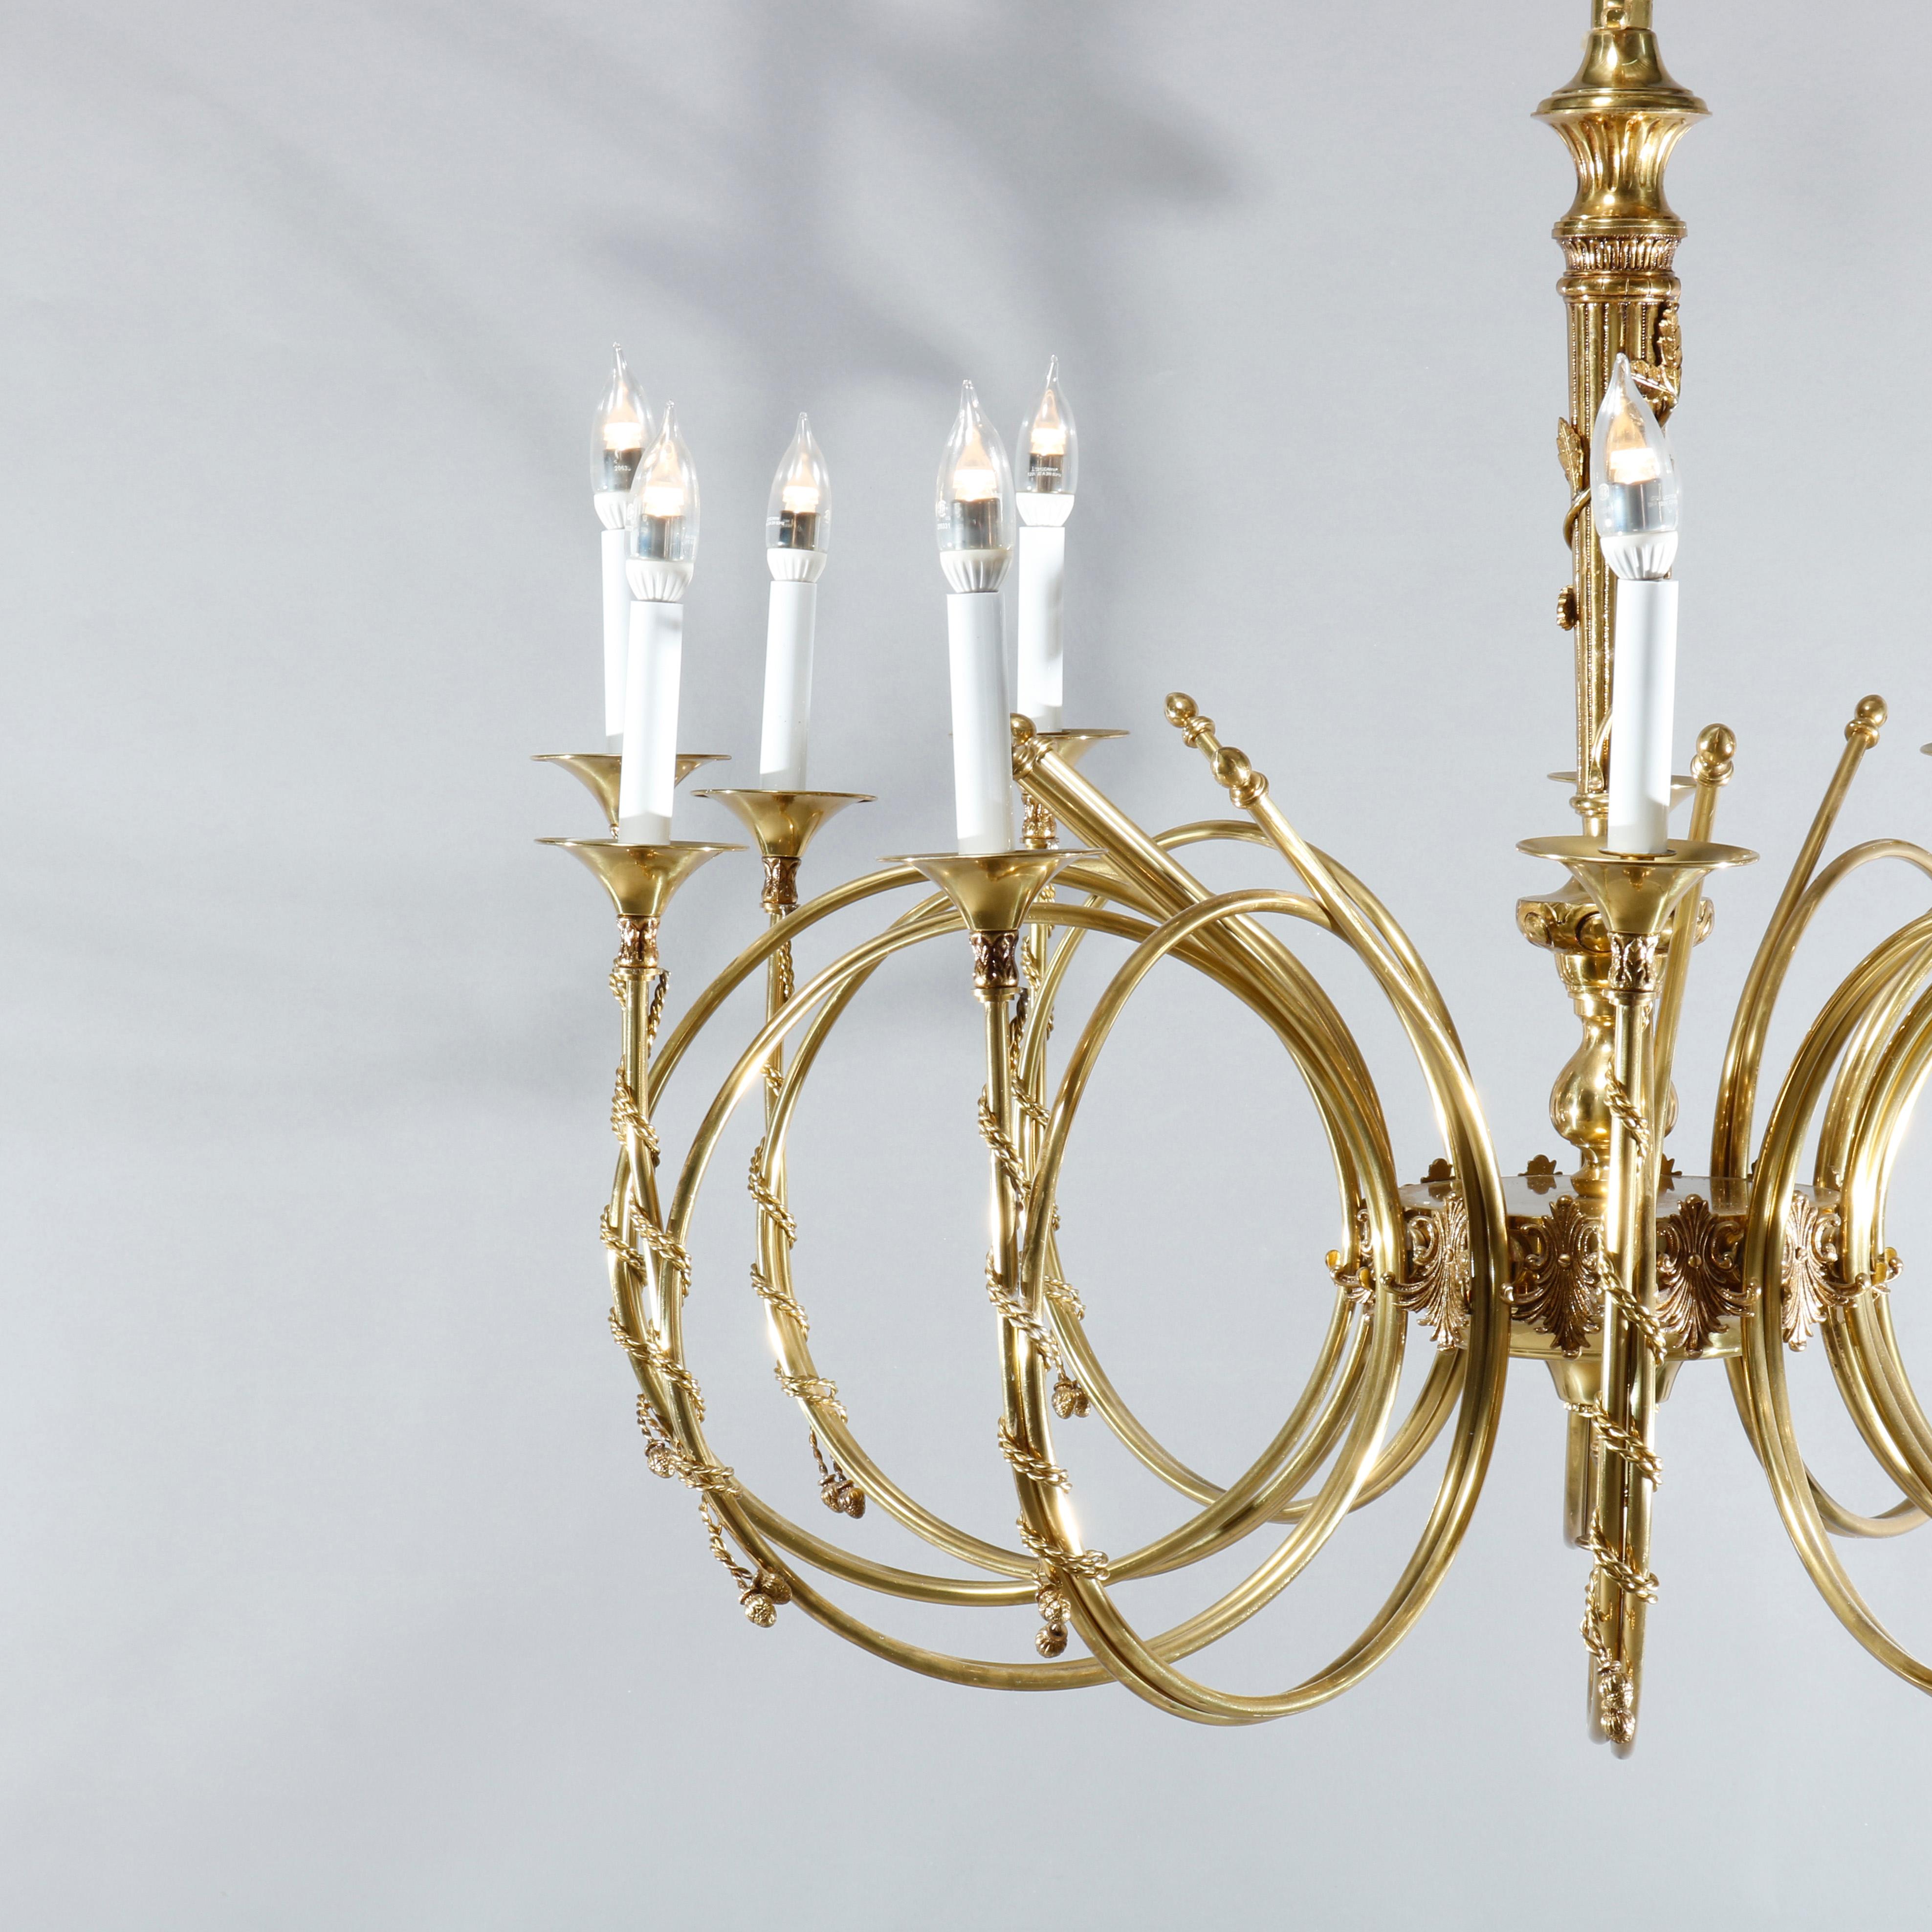 A large and antique French Empire chandelier offers brass frame with central reeded column having foliate vine wrap and twelve French Horn or Trumpet form scrolled arms wrapped in tassels and terminating in candle lights, 20th century

Measures: 47